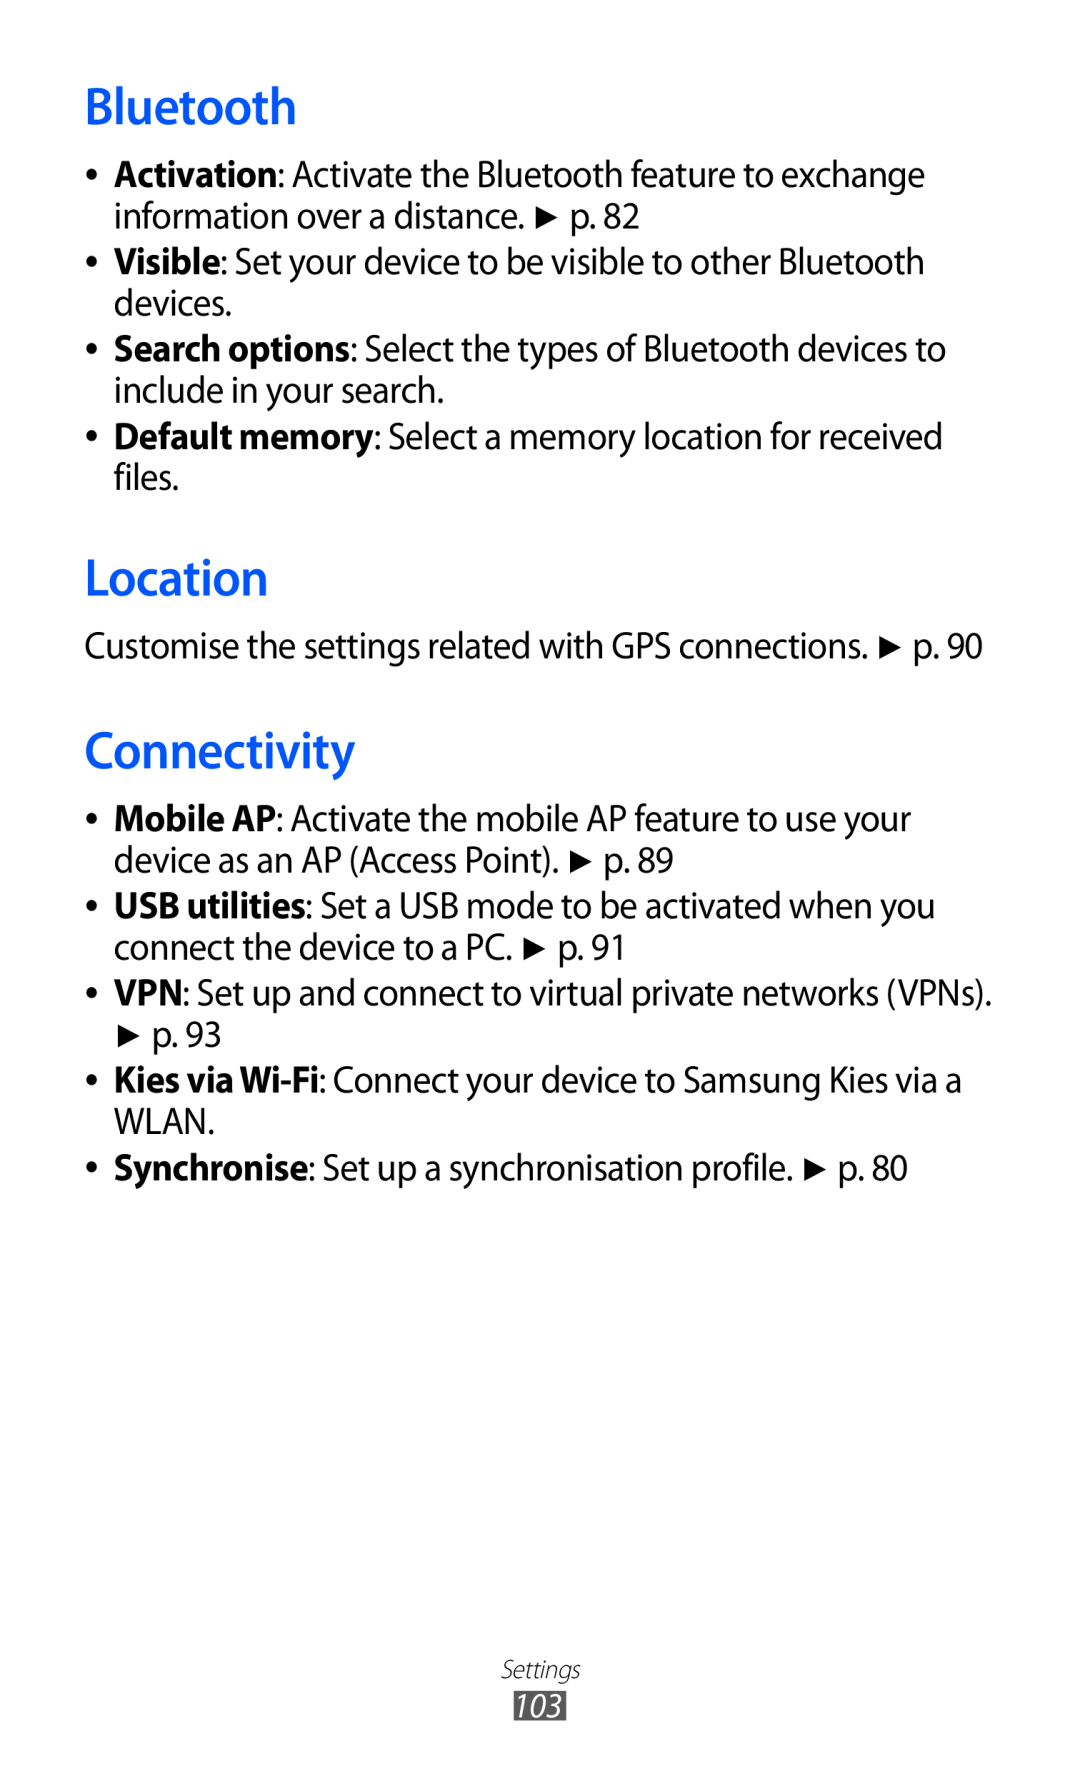 Samsung GT-S5380SSAWIN manual Location, Connectivity, Visible Set your device to be visible to other Bluetooth devices 